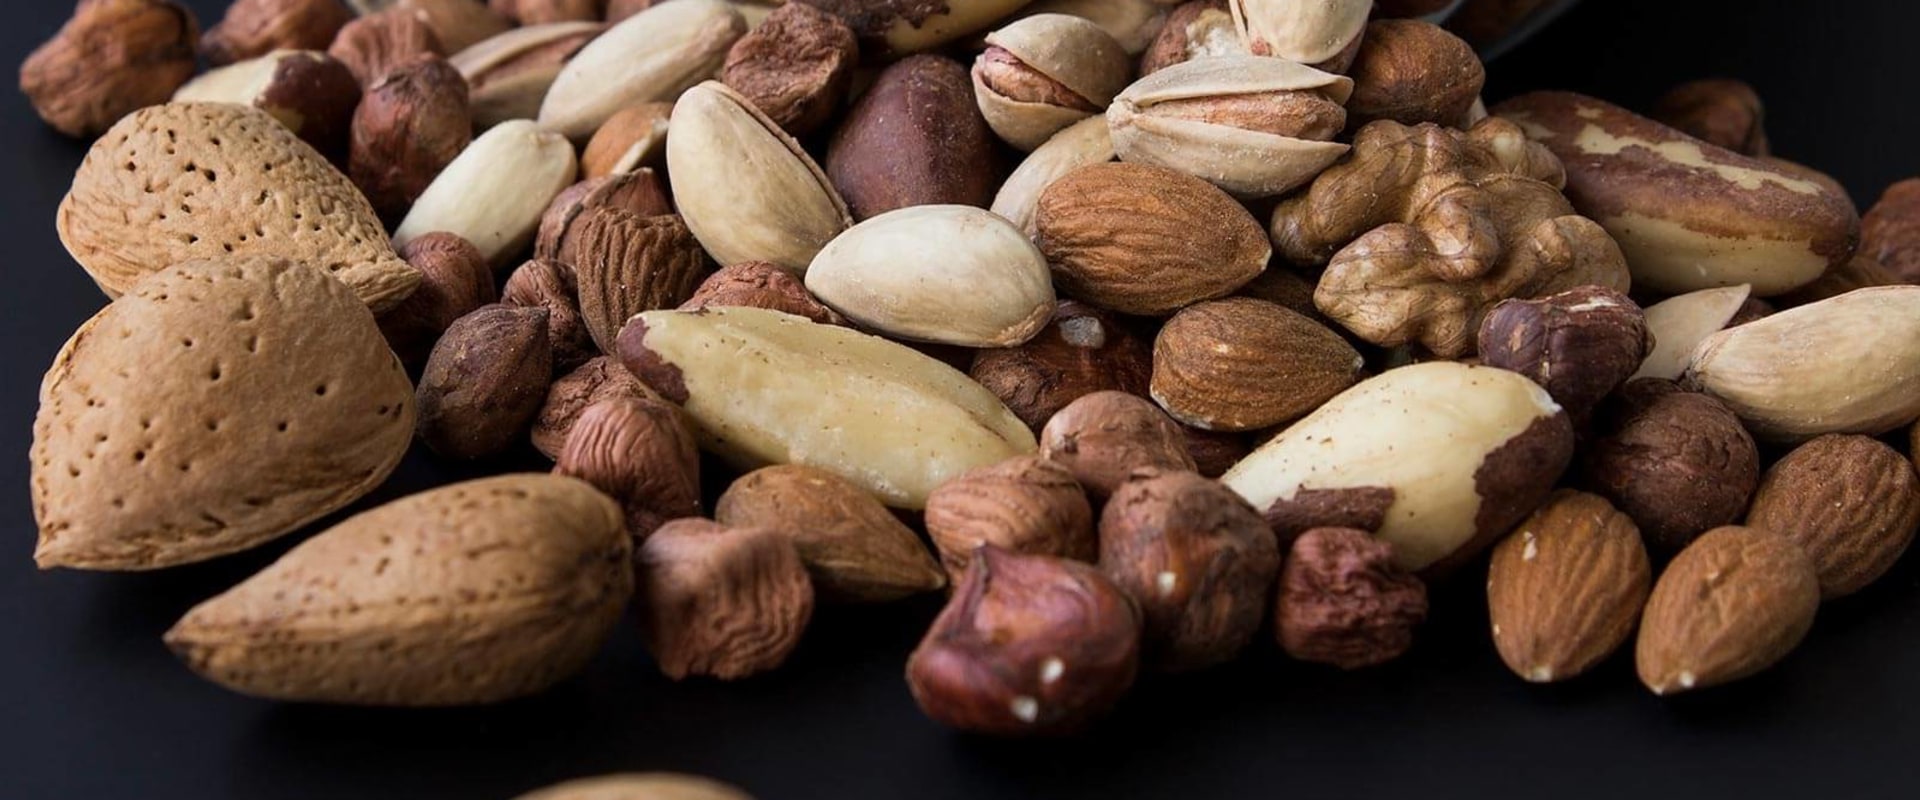 How do you store nuts for years?